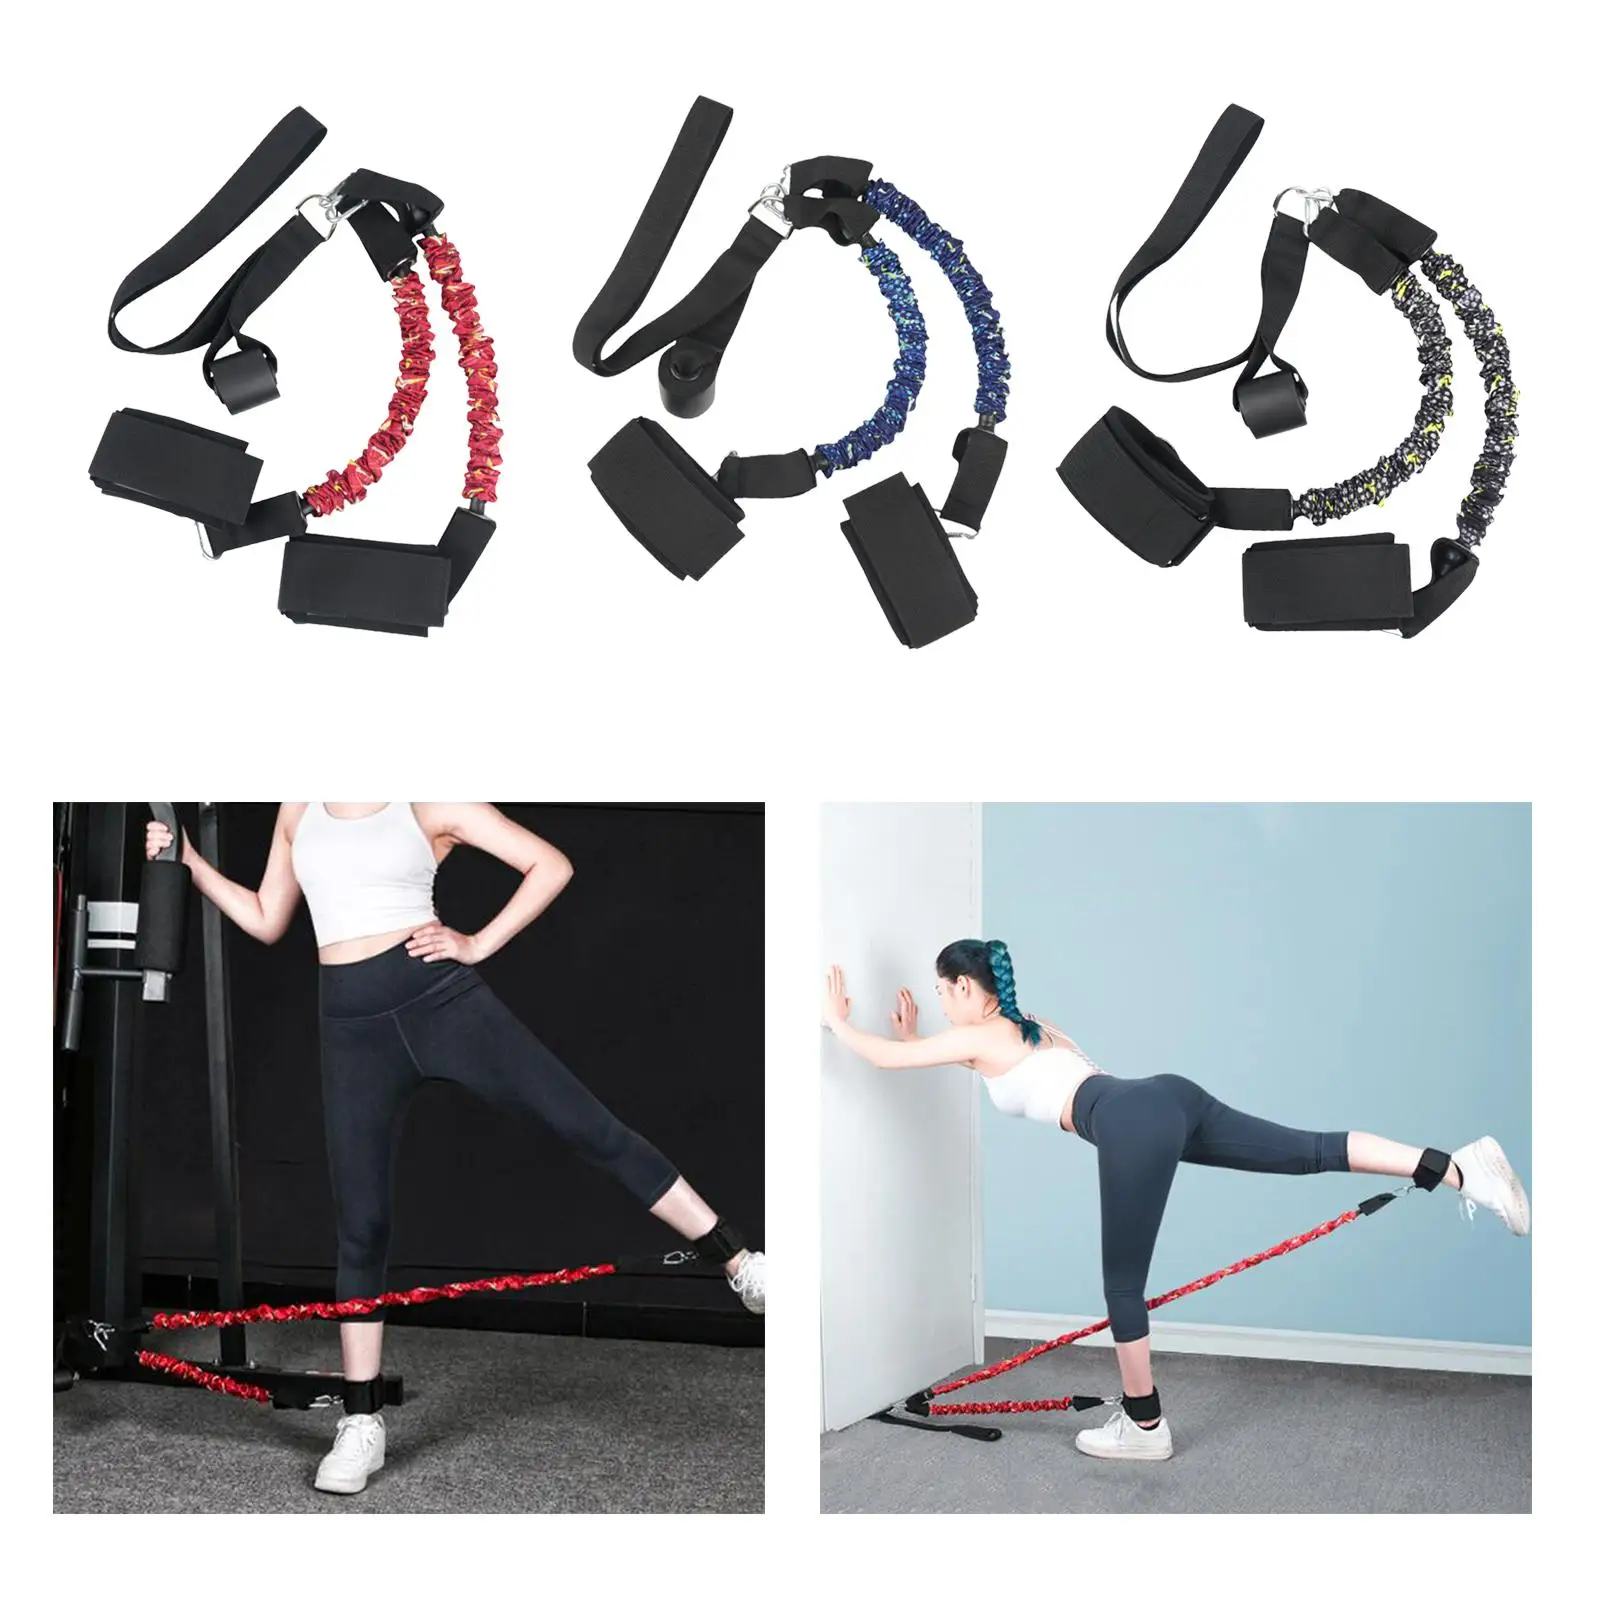 Resistance Band Pull Rope Tool Abdominal Wheel Tension Rope Stretch Bands for Home Gym Abdominal Muscle Training Bodybuilding